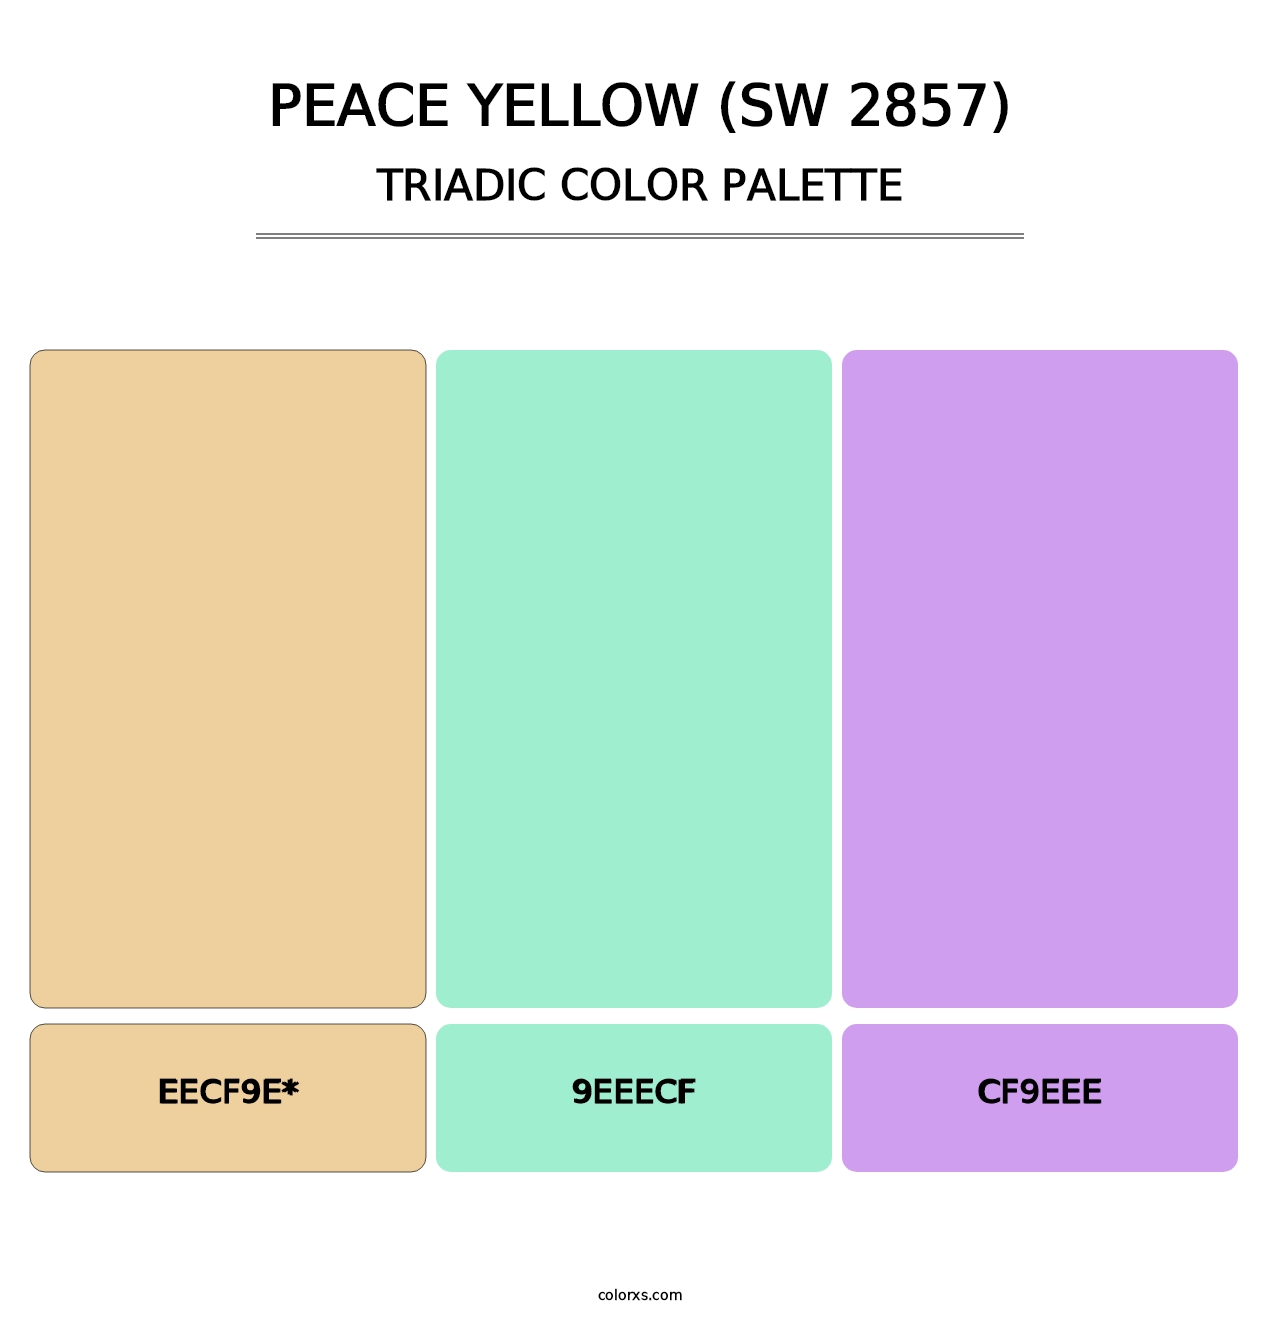 Peace Yellow (SW 2857) - Triadic Color Palette